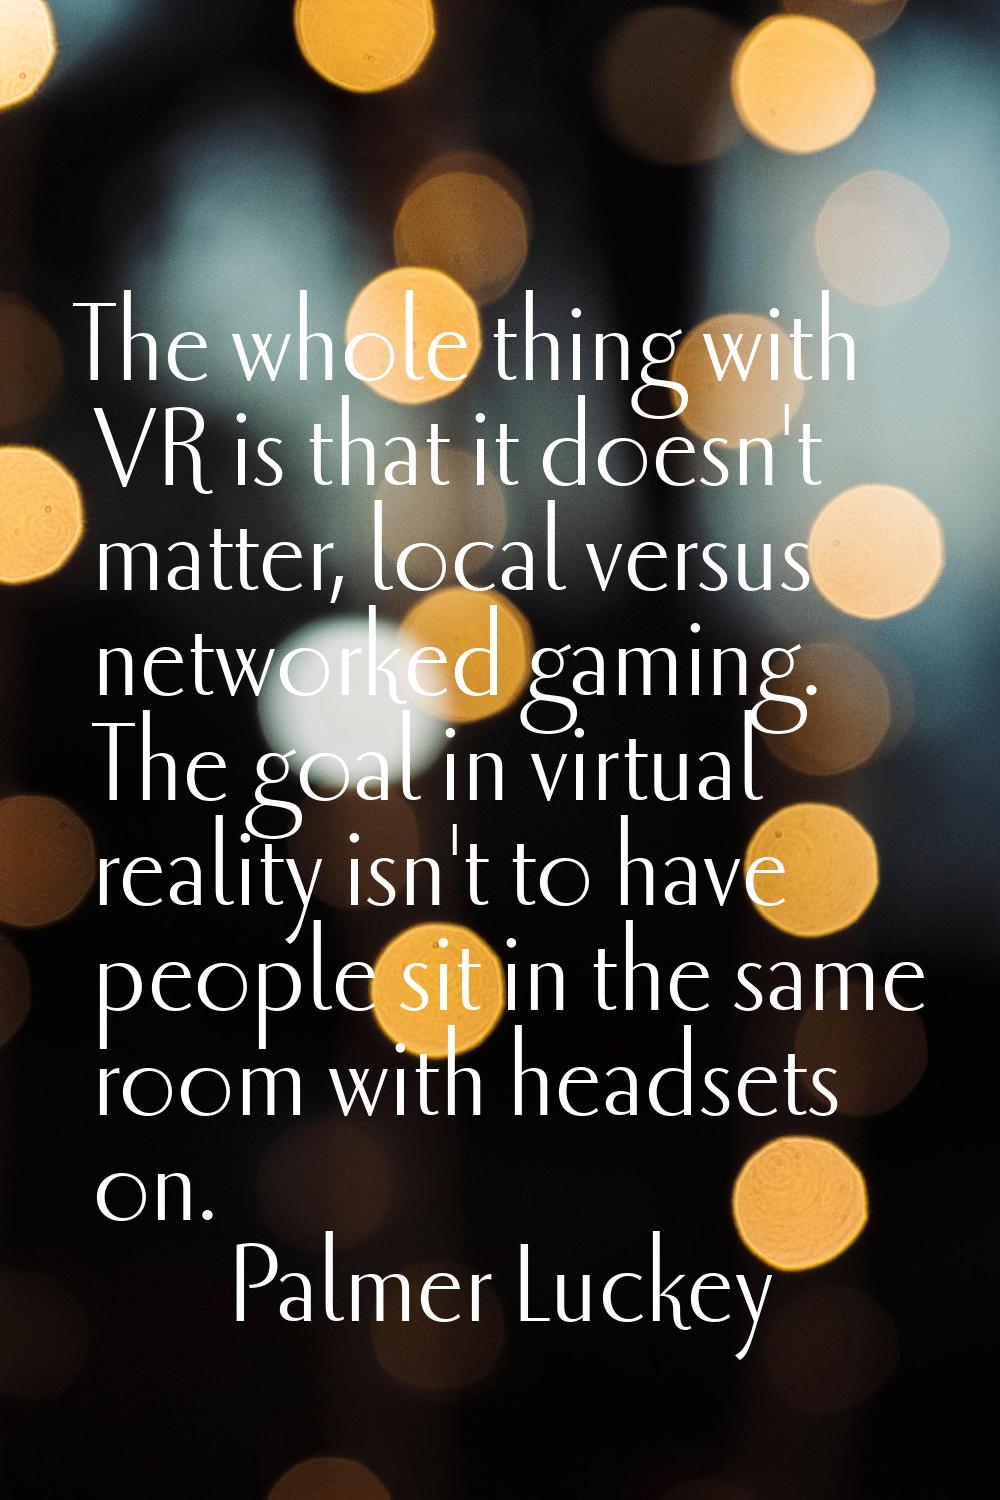 The whole thing with VR is that it doesn't matter, local versus networked gaming. The goal in virtu